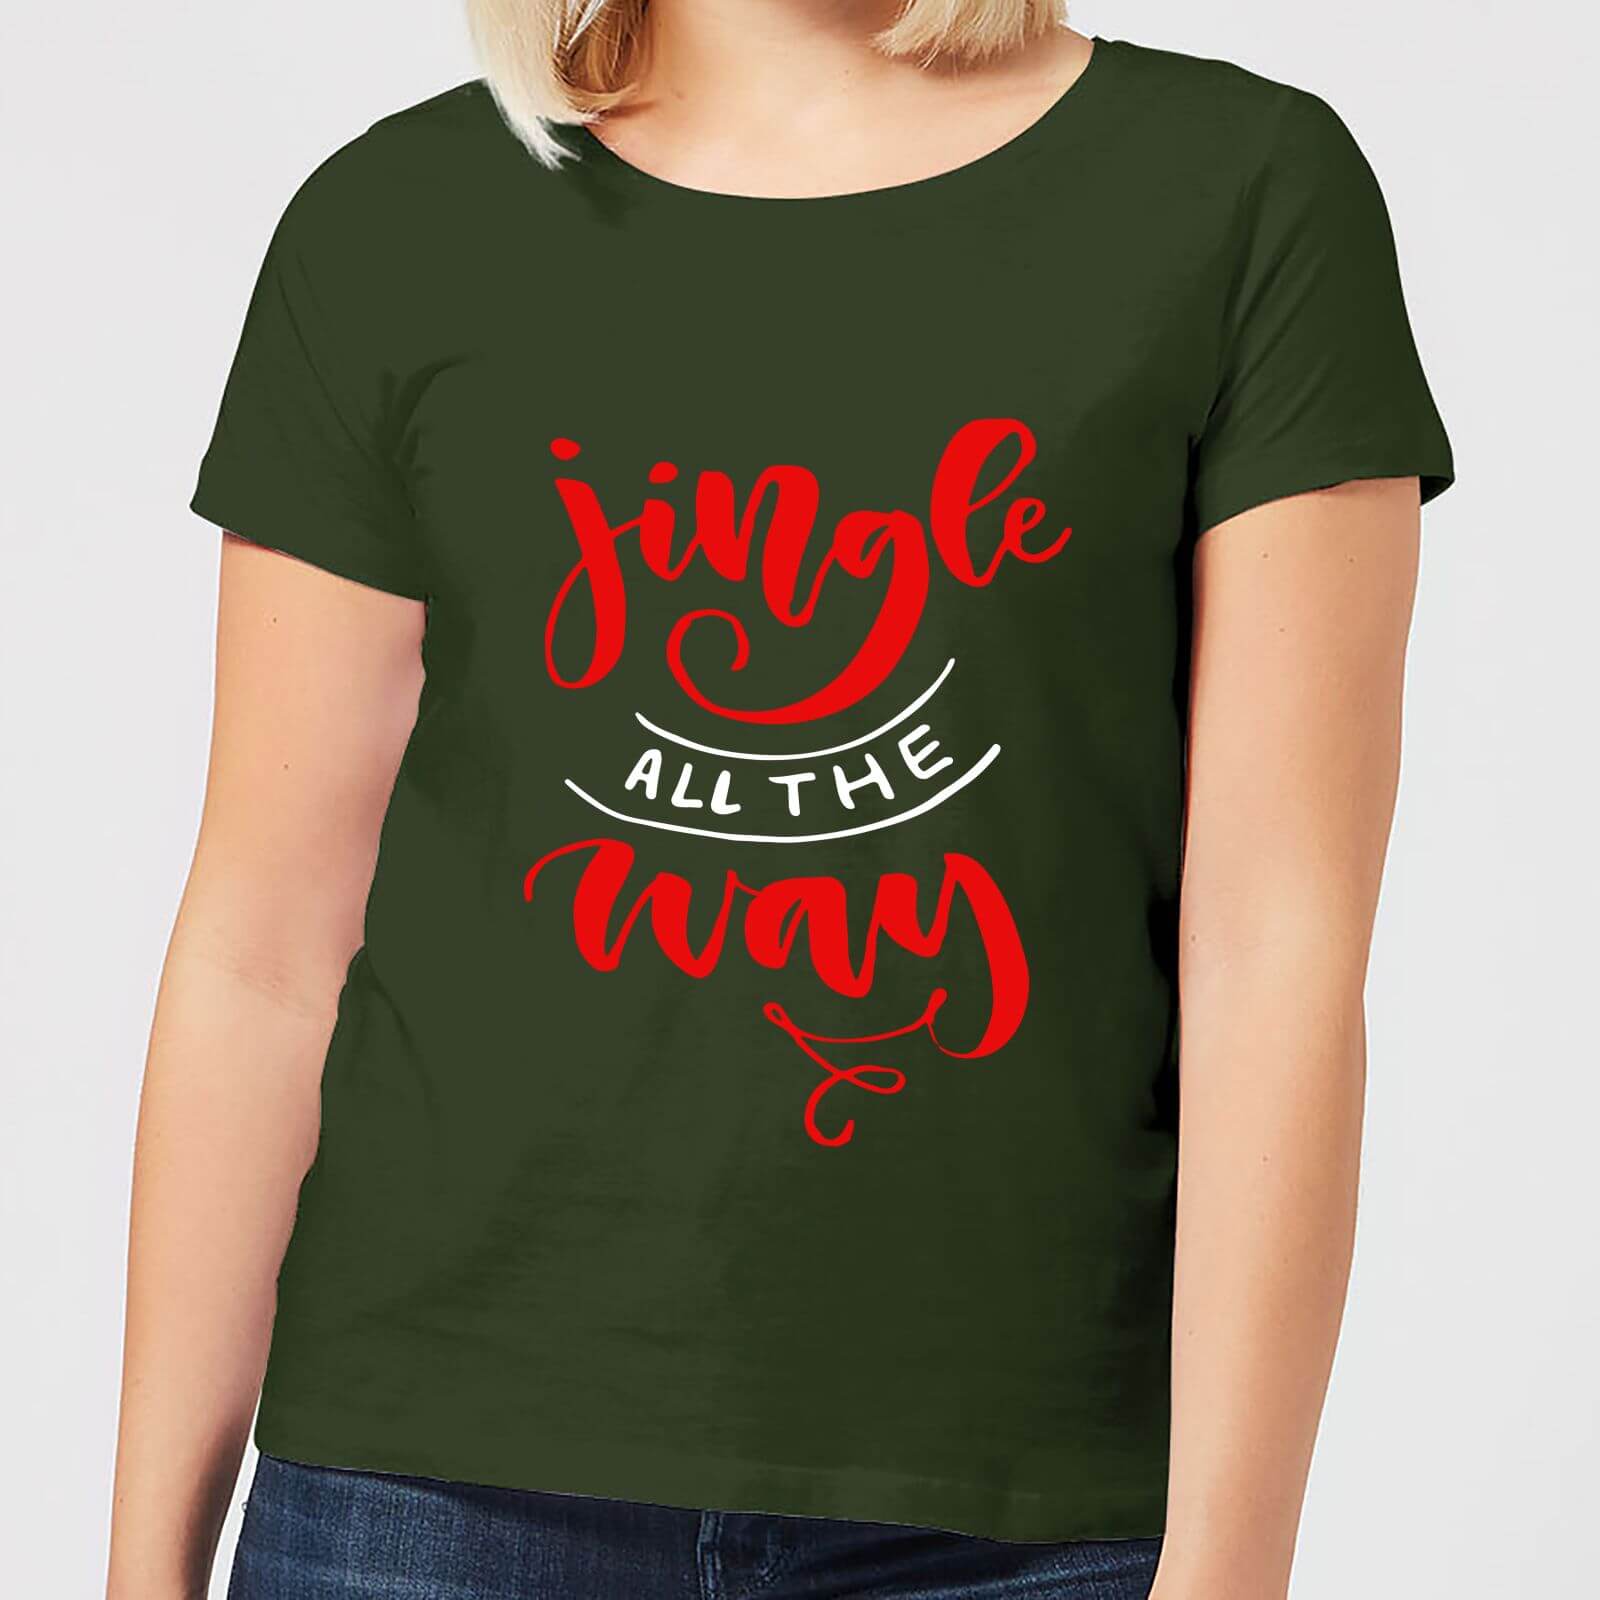 Jingle all the Way Women's T-Shirt - Forest Green - S - Forest Green